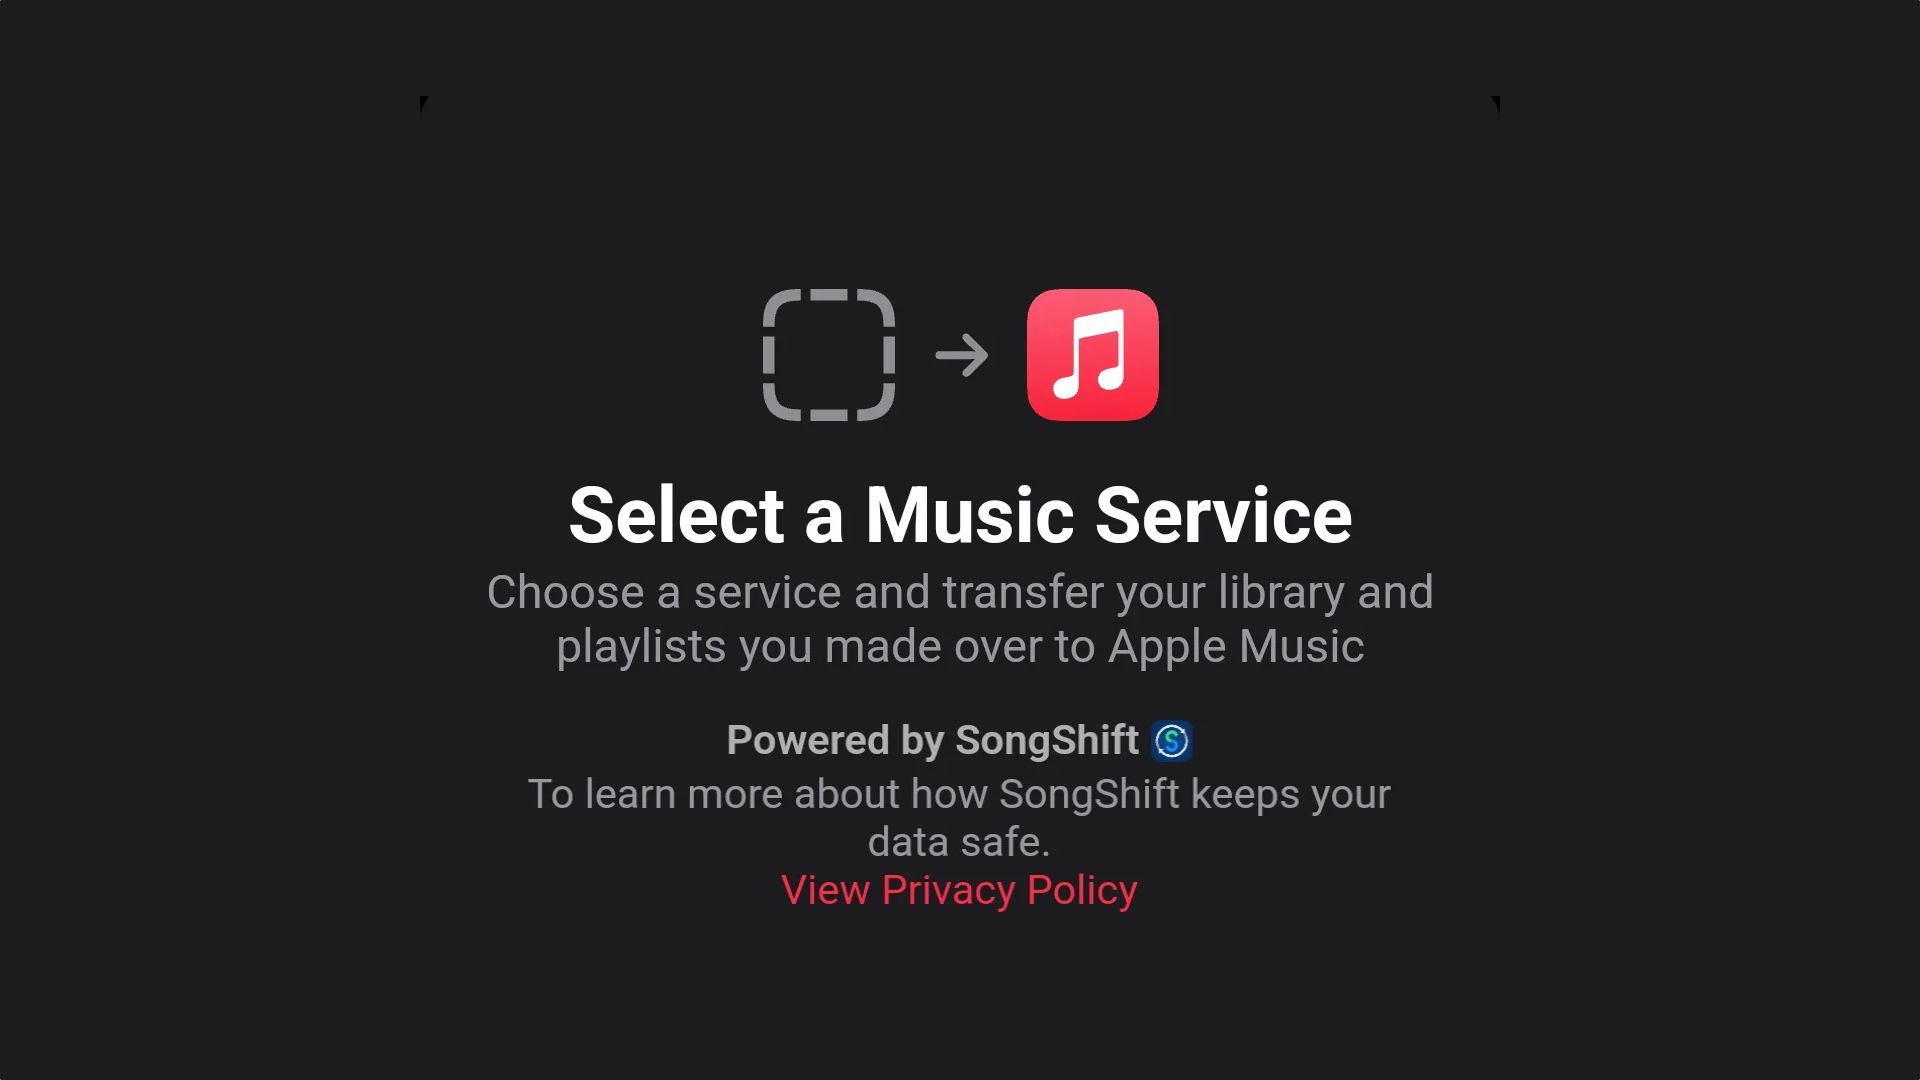 Apple Music’s Latest Innovation: Import Your Music Library from Any Streaming Service